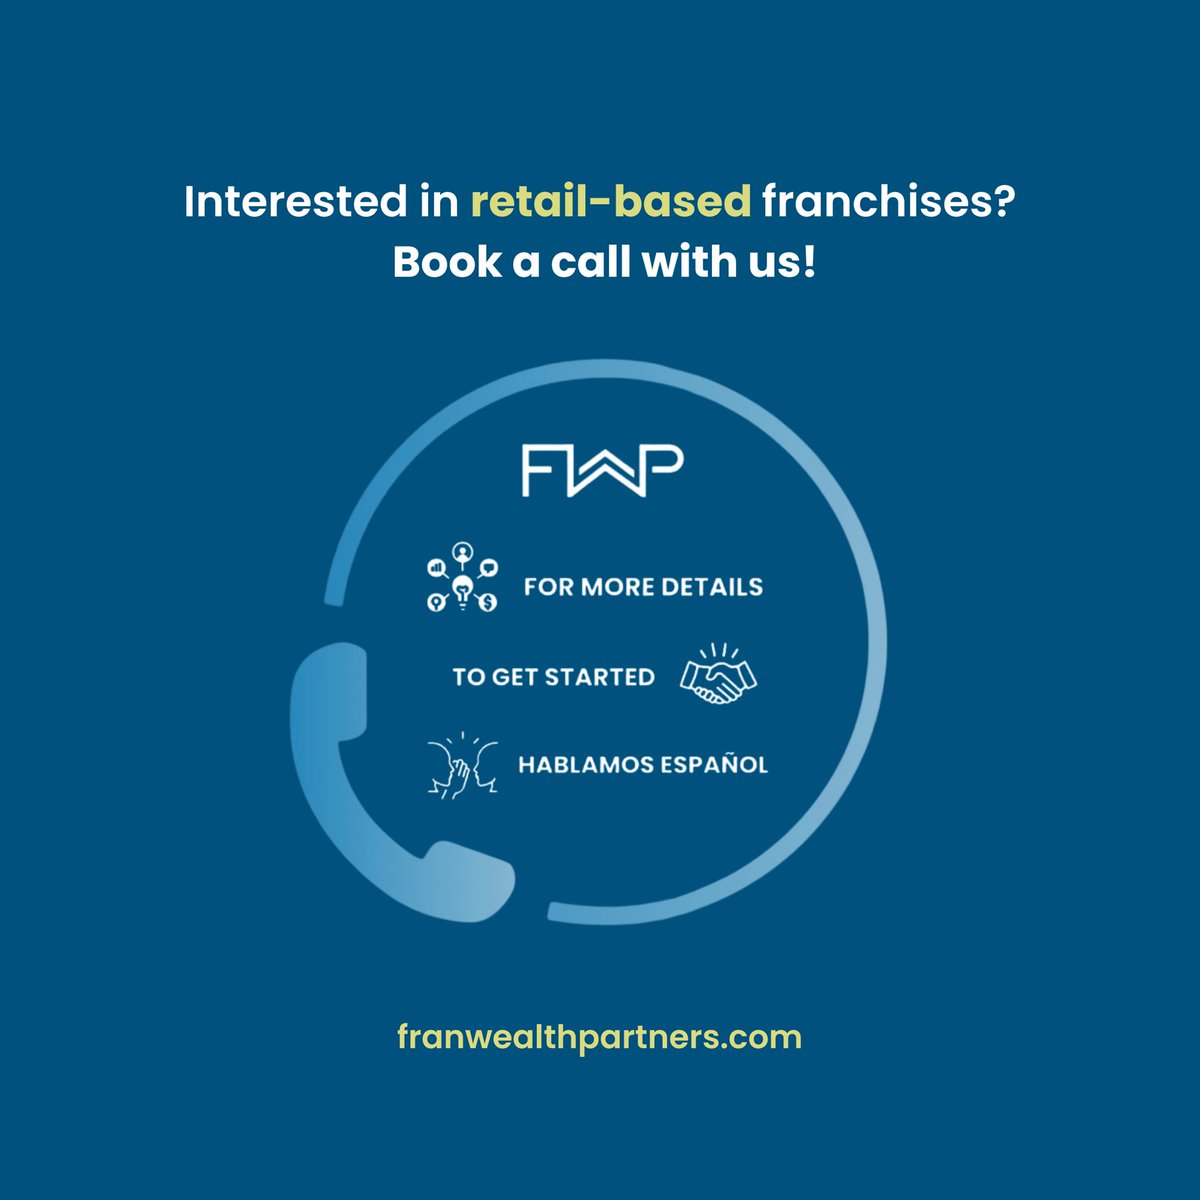 Own a retail-based #franchise and become the go-to spot. 📍 

Contact us franwealthpartners.com/contact-us

#fwp #franchisee #franchiseopportunity #entrepreneur #entrepreneurshipjourney #entrepreneurlife #financialfreedom #businessownership #franchisecoach #selfemployment #lifestyle